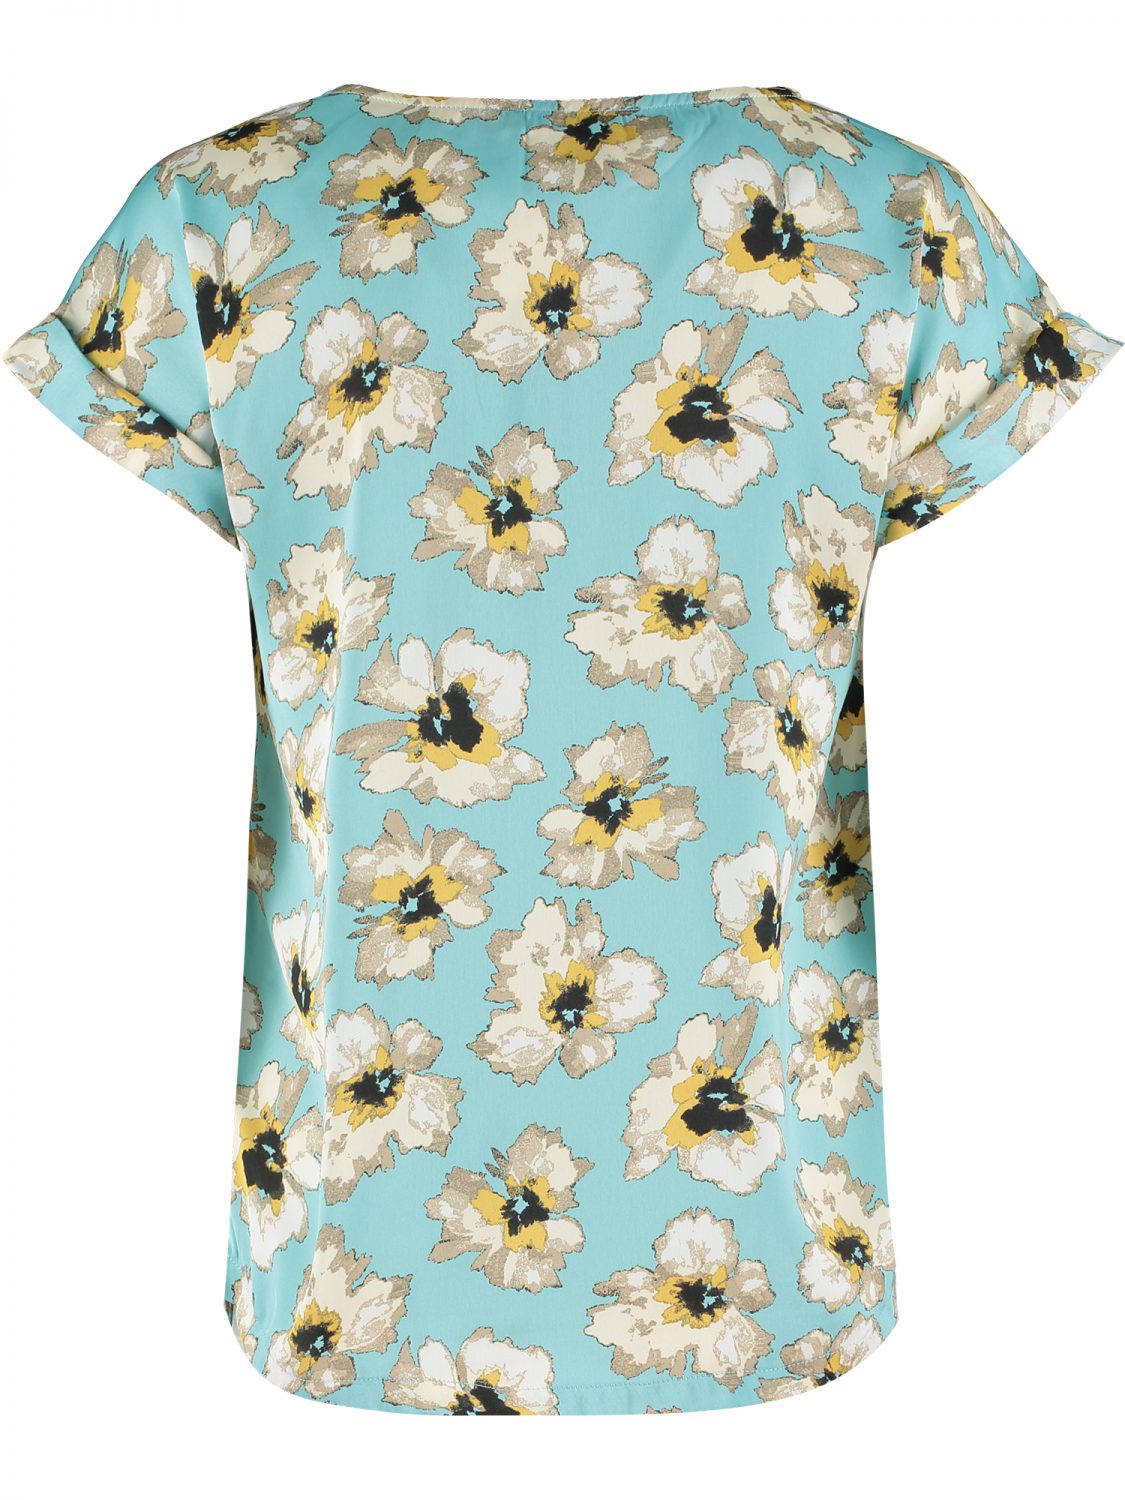 Turquoise Floral Top B